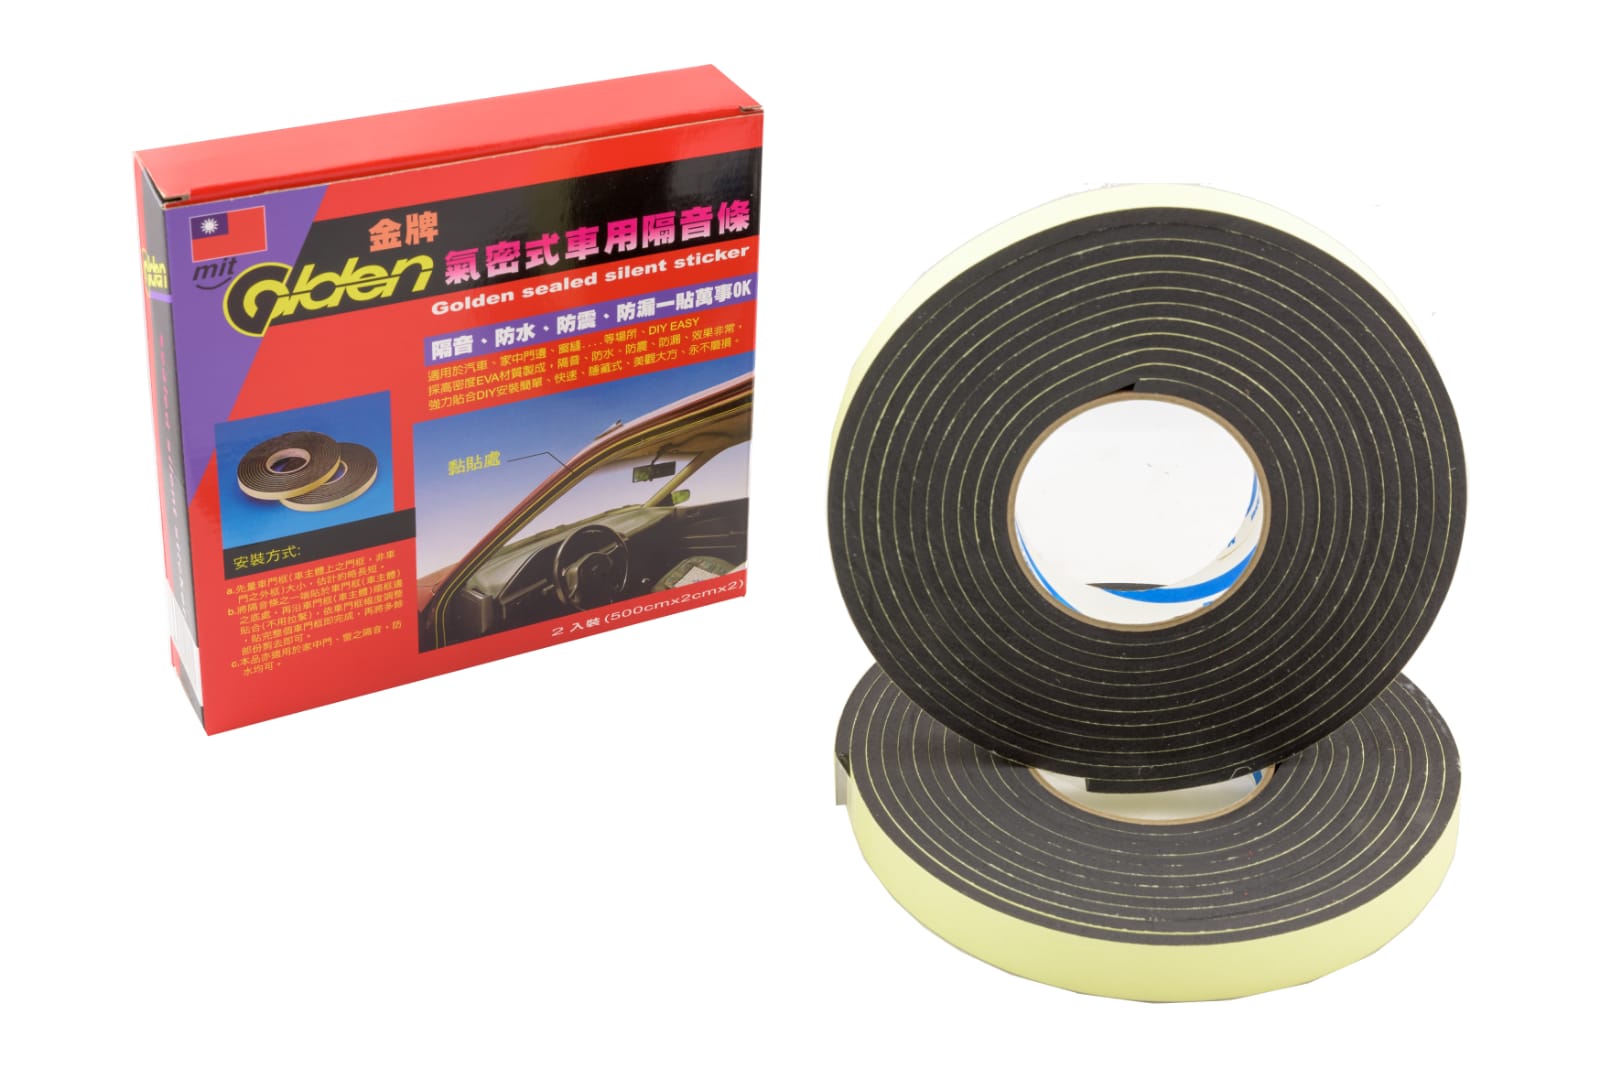 Sealed Silent Sticker for Cars (2 rolls)